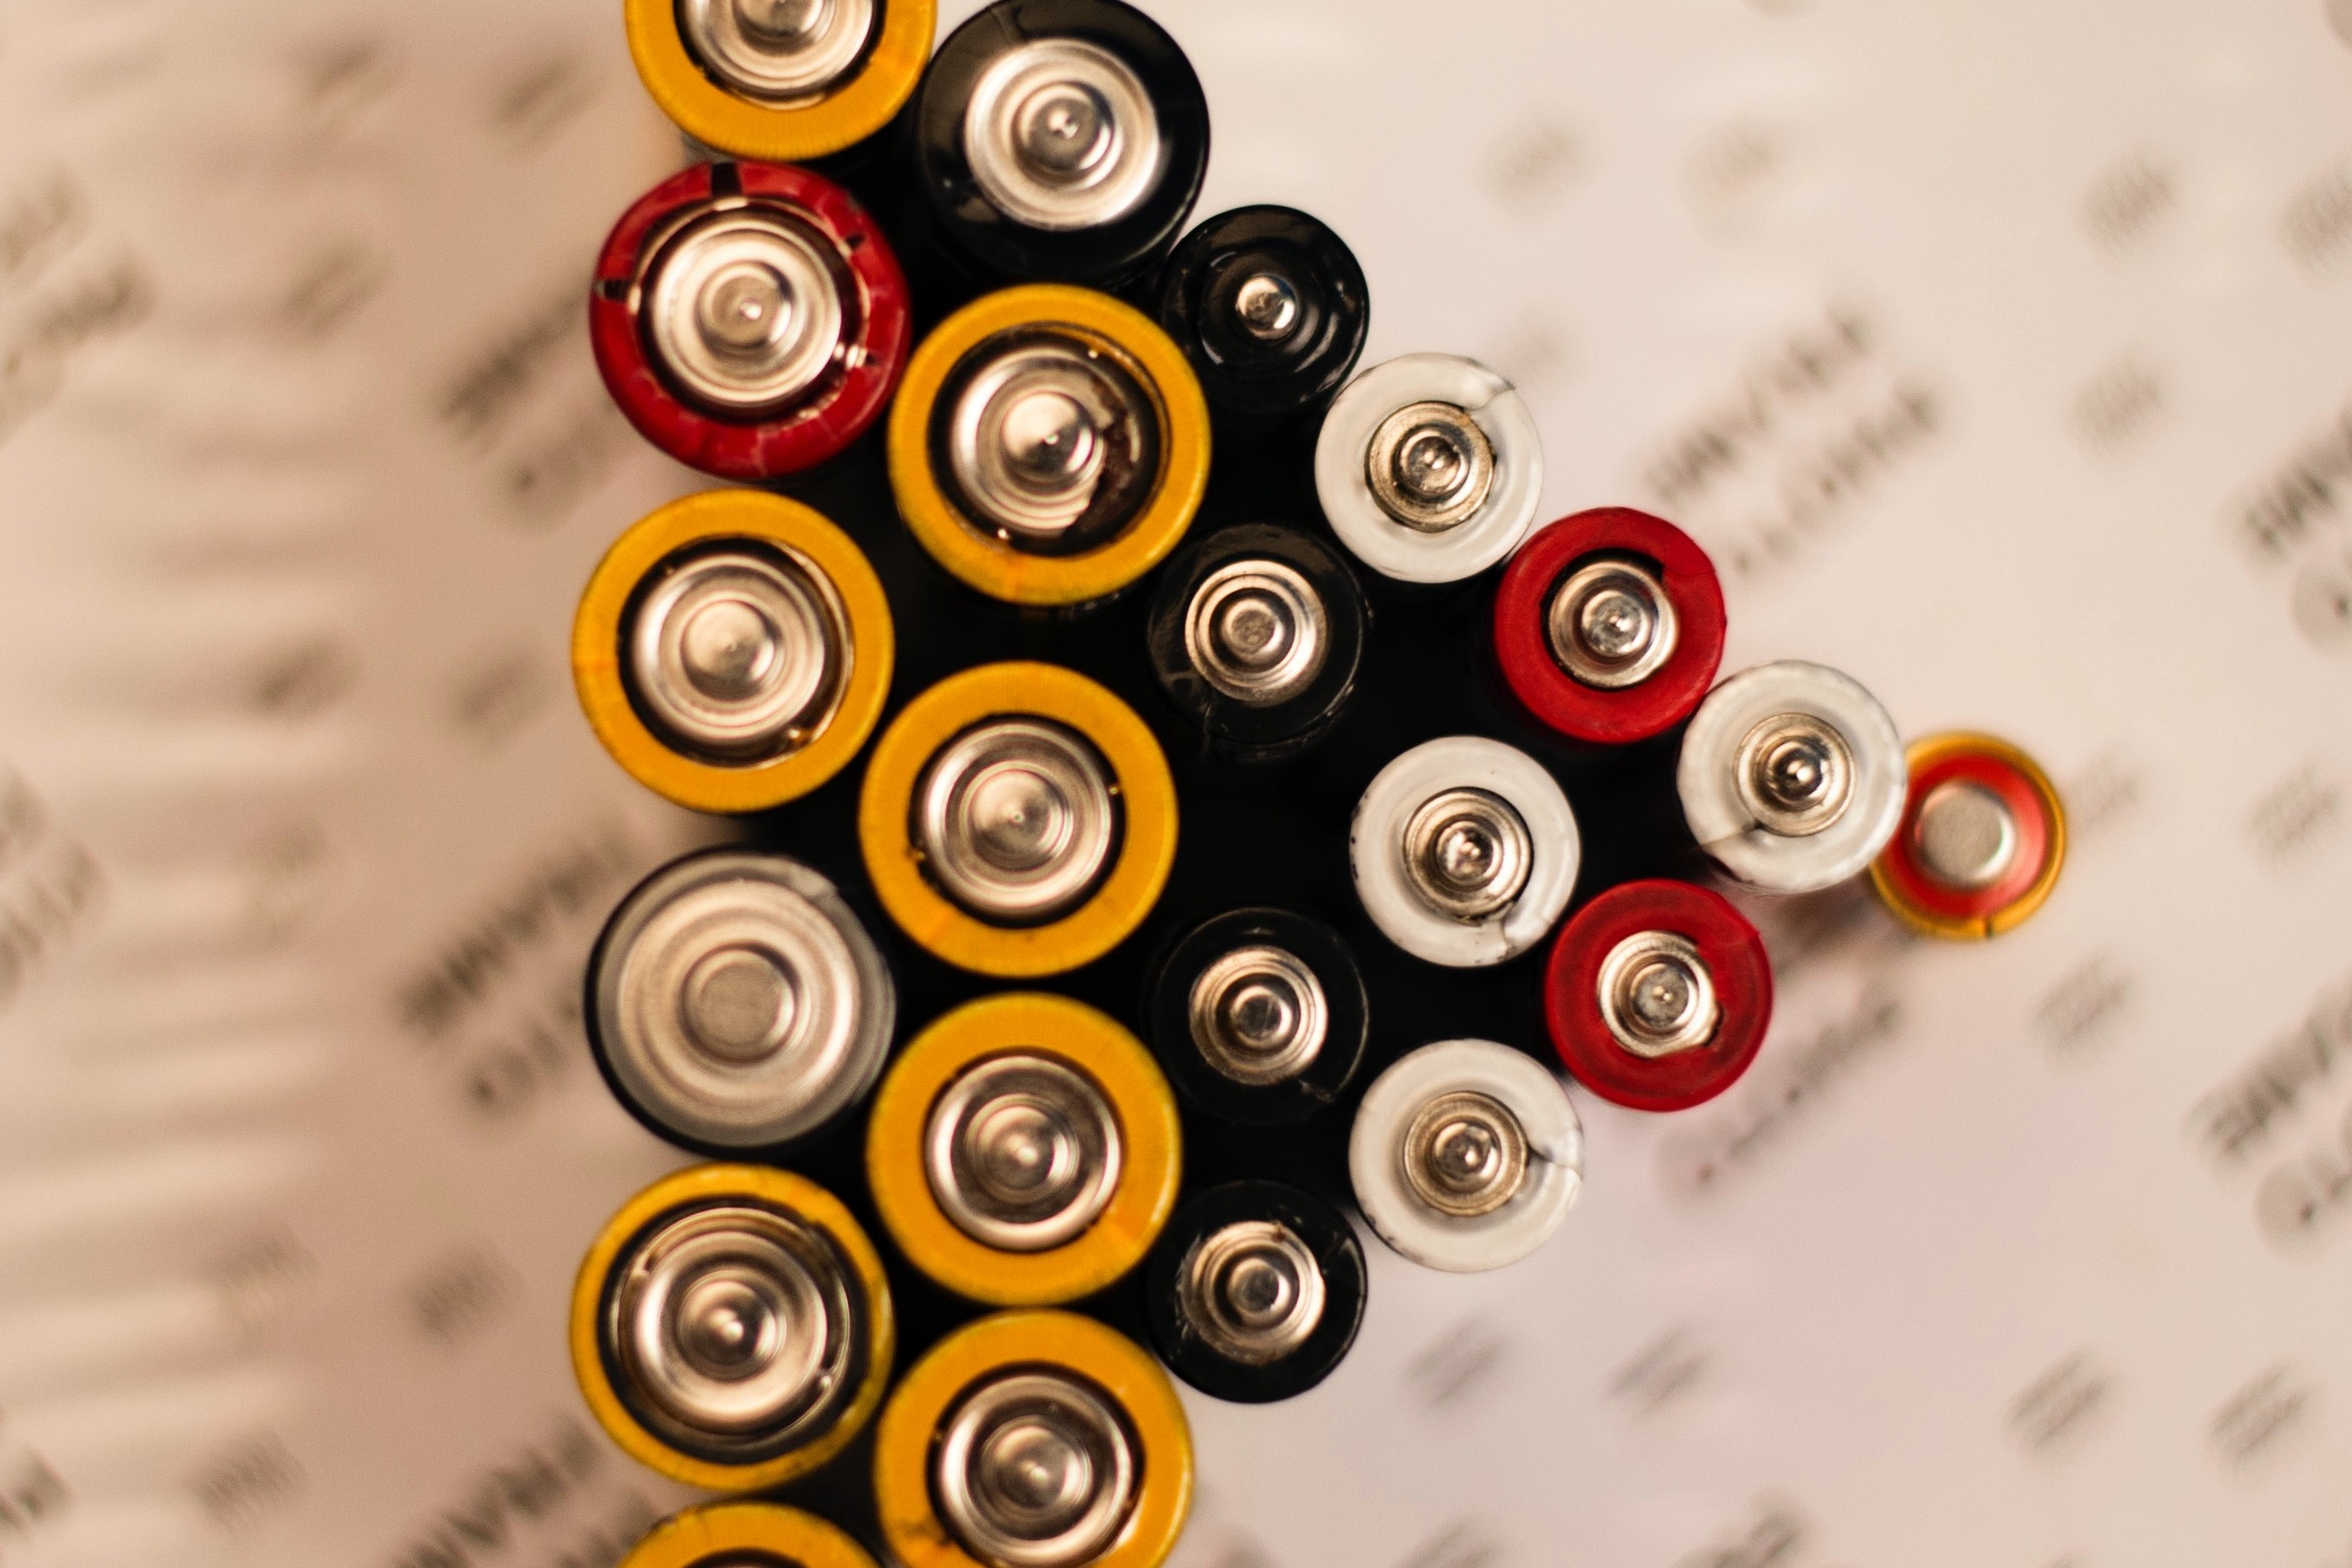 5 Technologies in Testing NOW That Are Heating Up the Battery Market